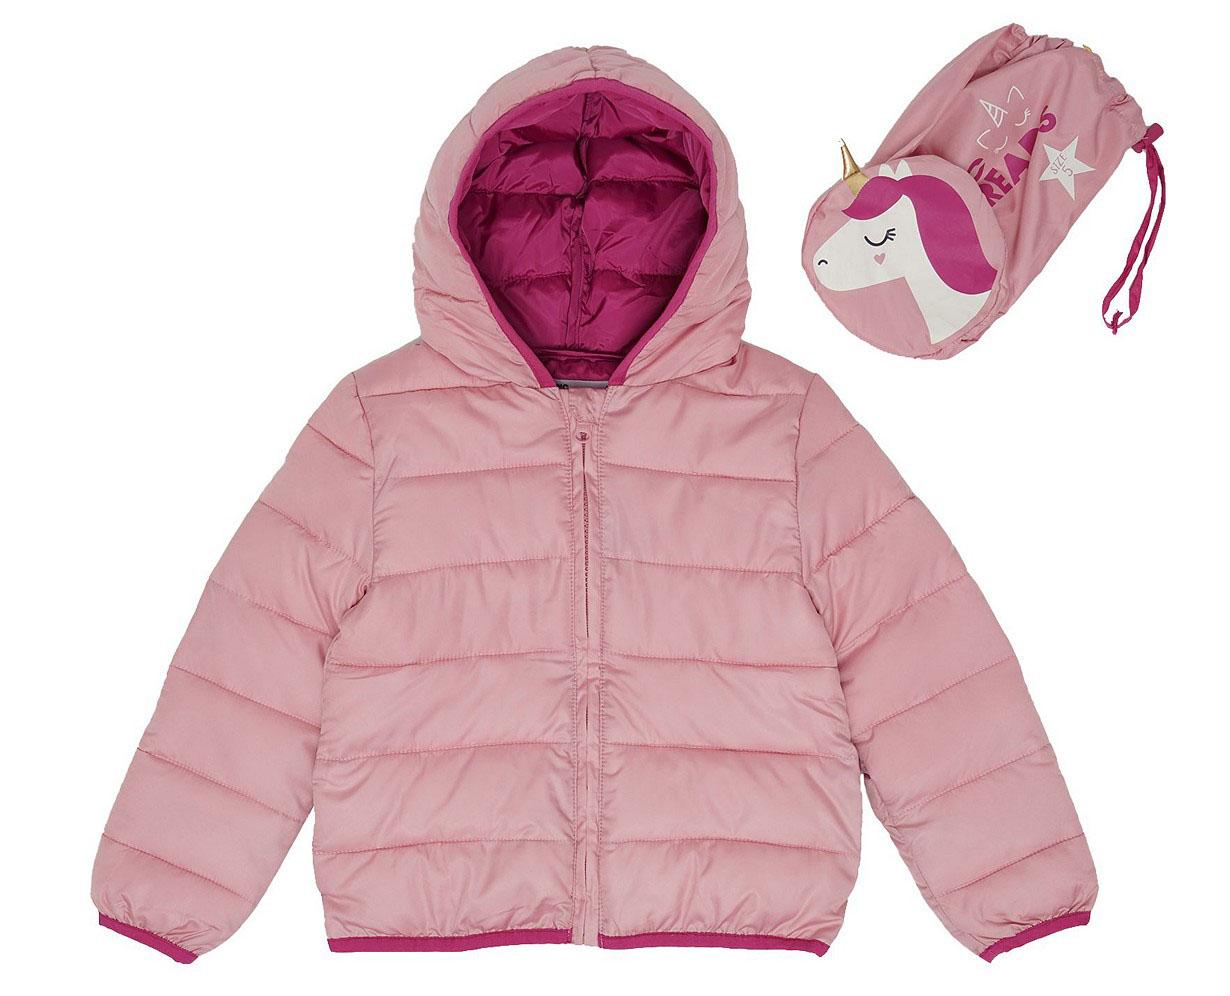 Epic Threads Kids Hooded Full Zip Packable Jacket for $14.99